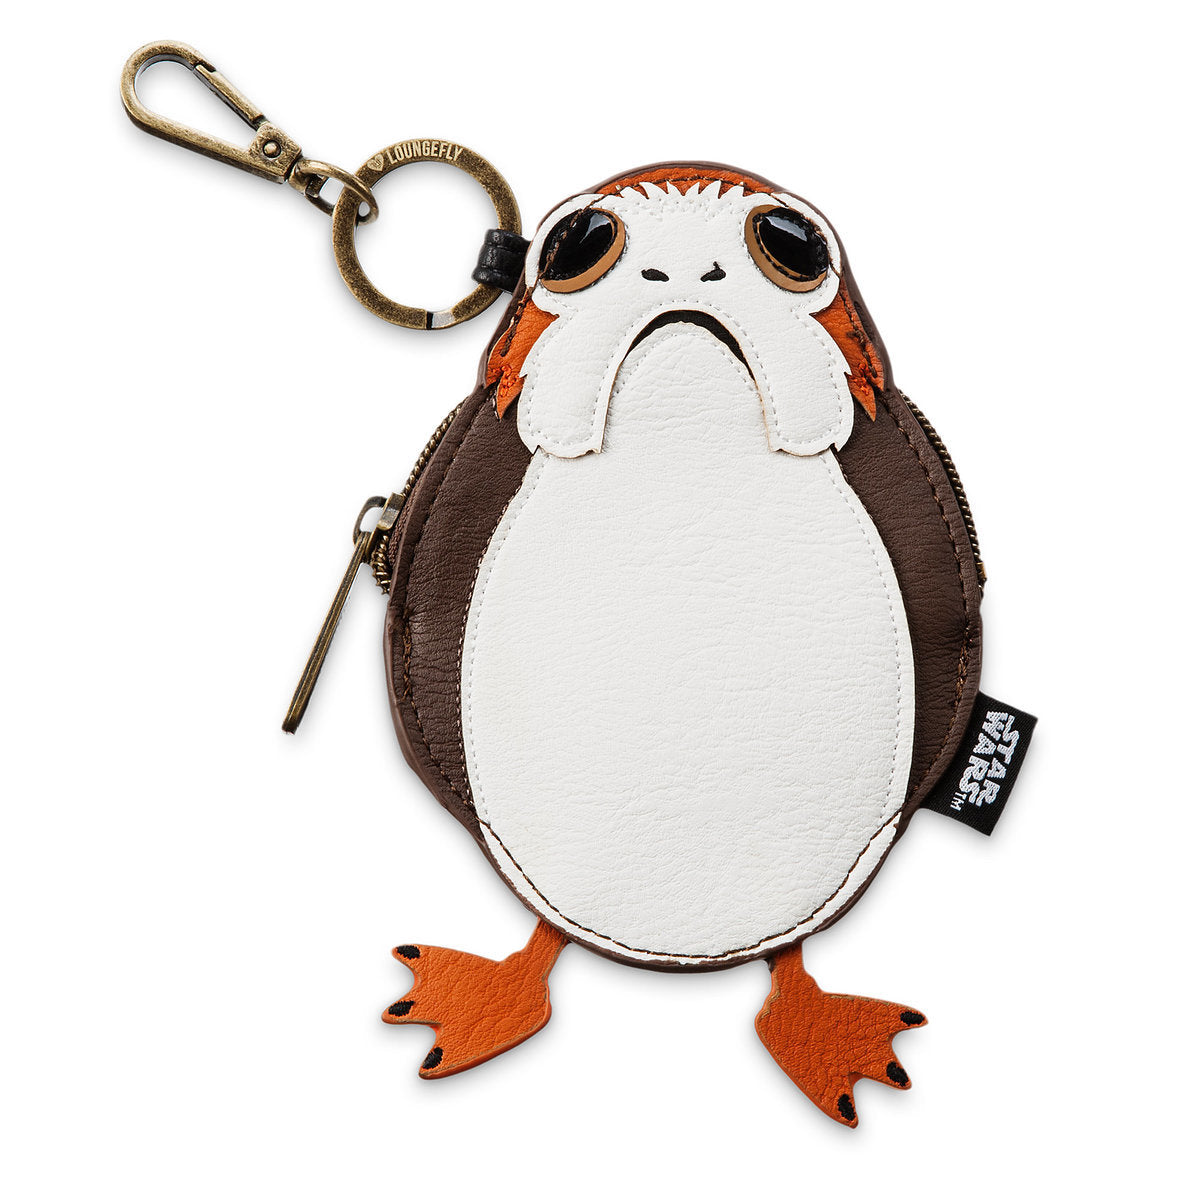 Disney Star Wars Porg Coin Purse by Loungefly New with Tags